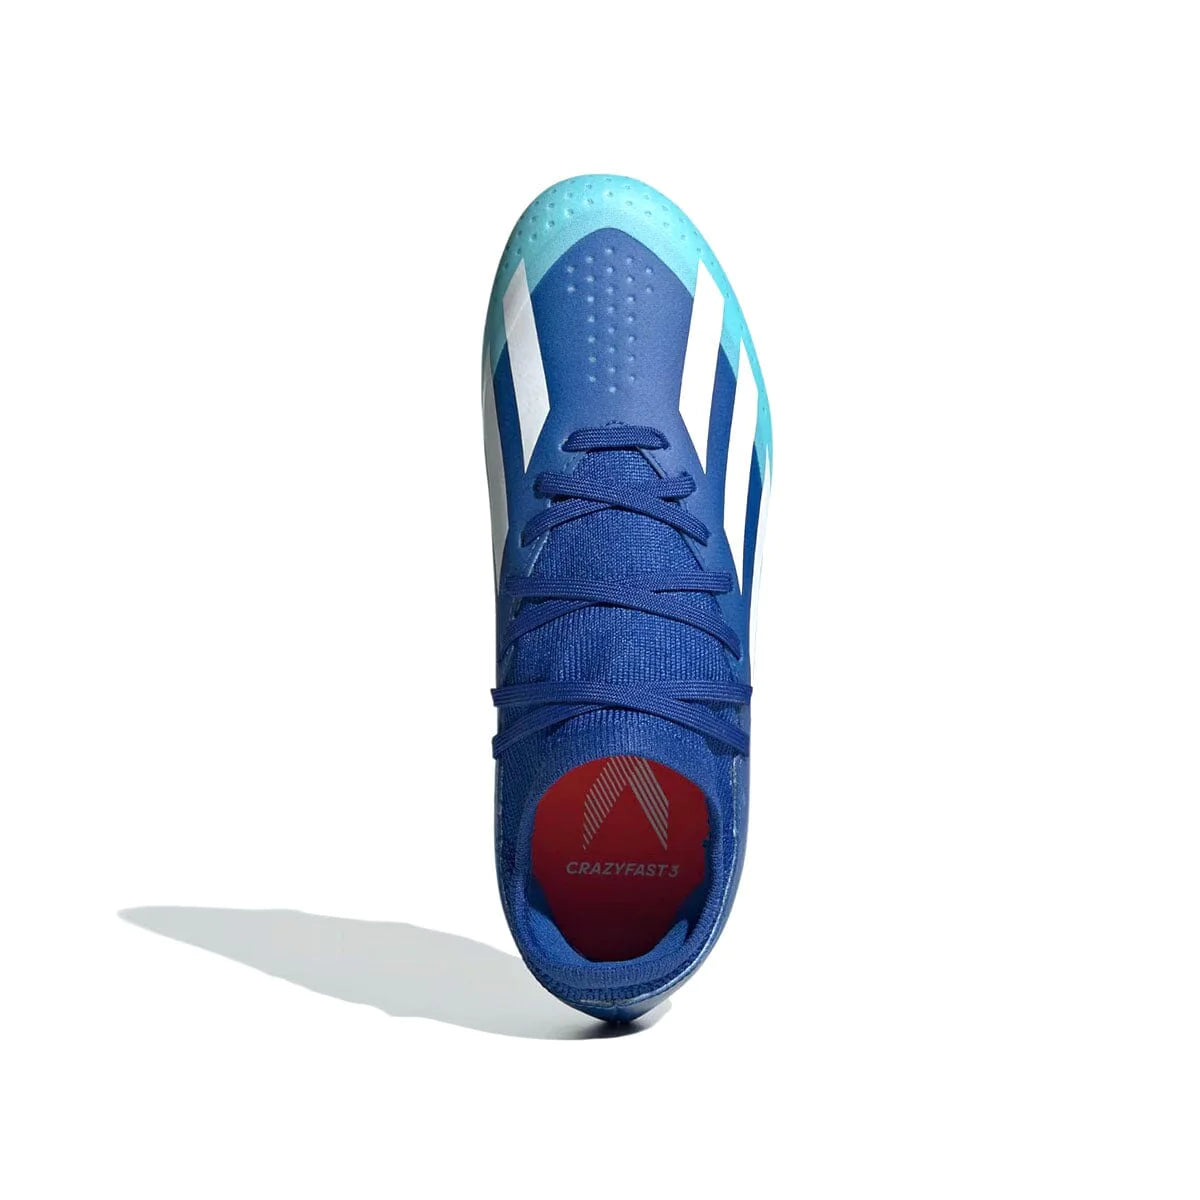 adidas X CrazyFast.3 FG Junior Cleat Ground Soccer Royal/White – Bright - /Solar USA Red ID9354 Firm Soccer Zone